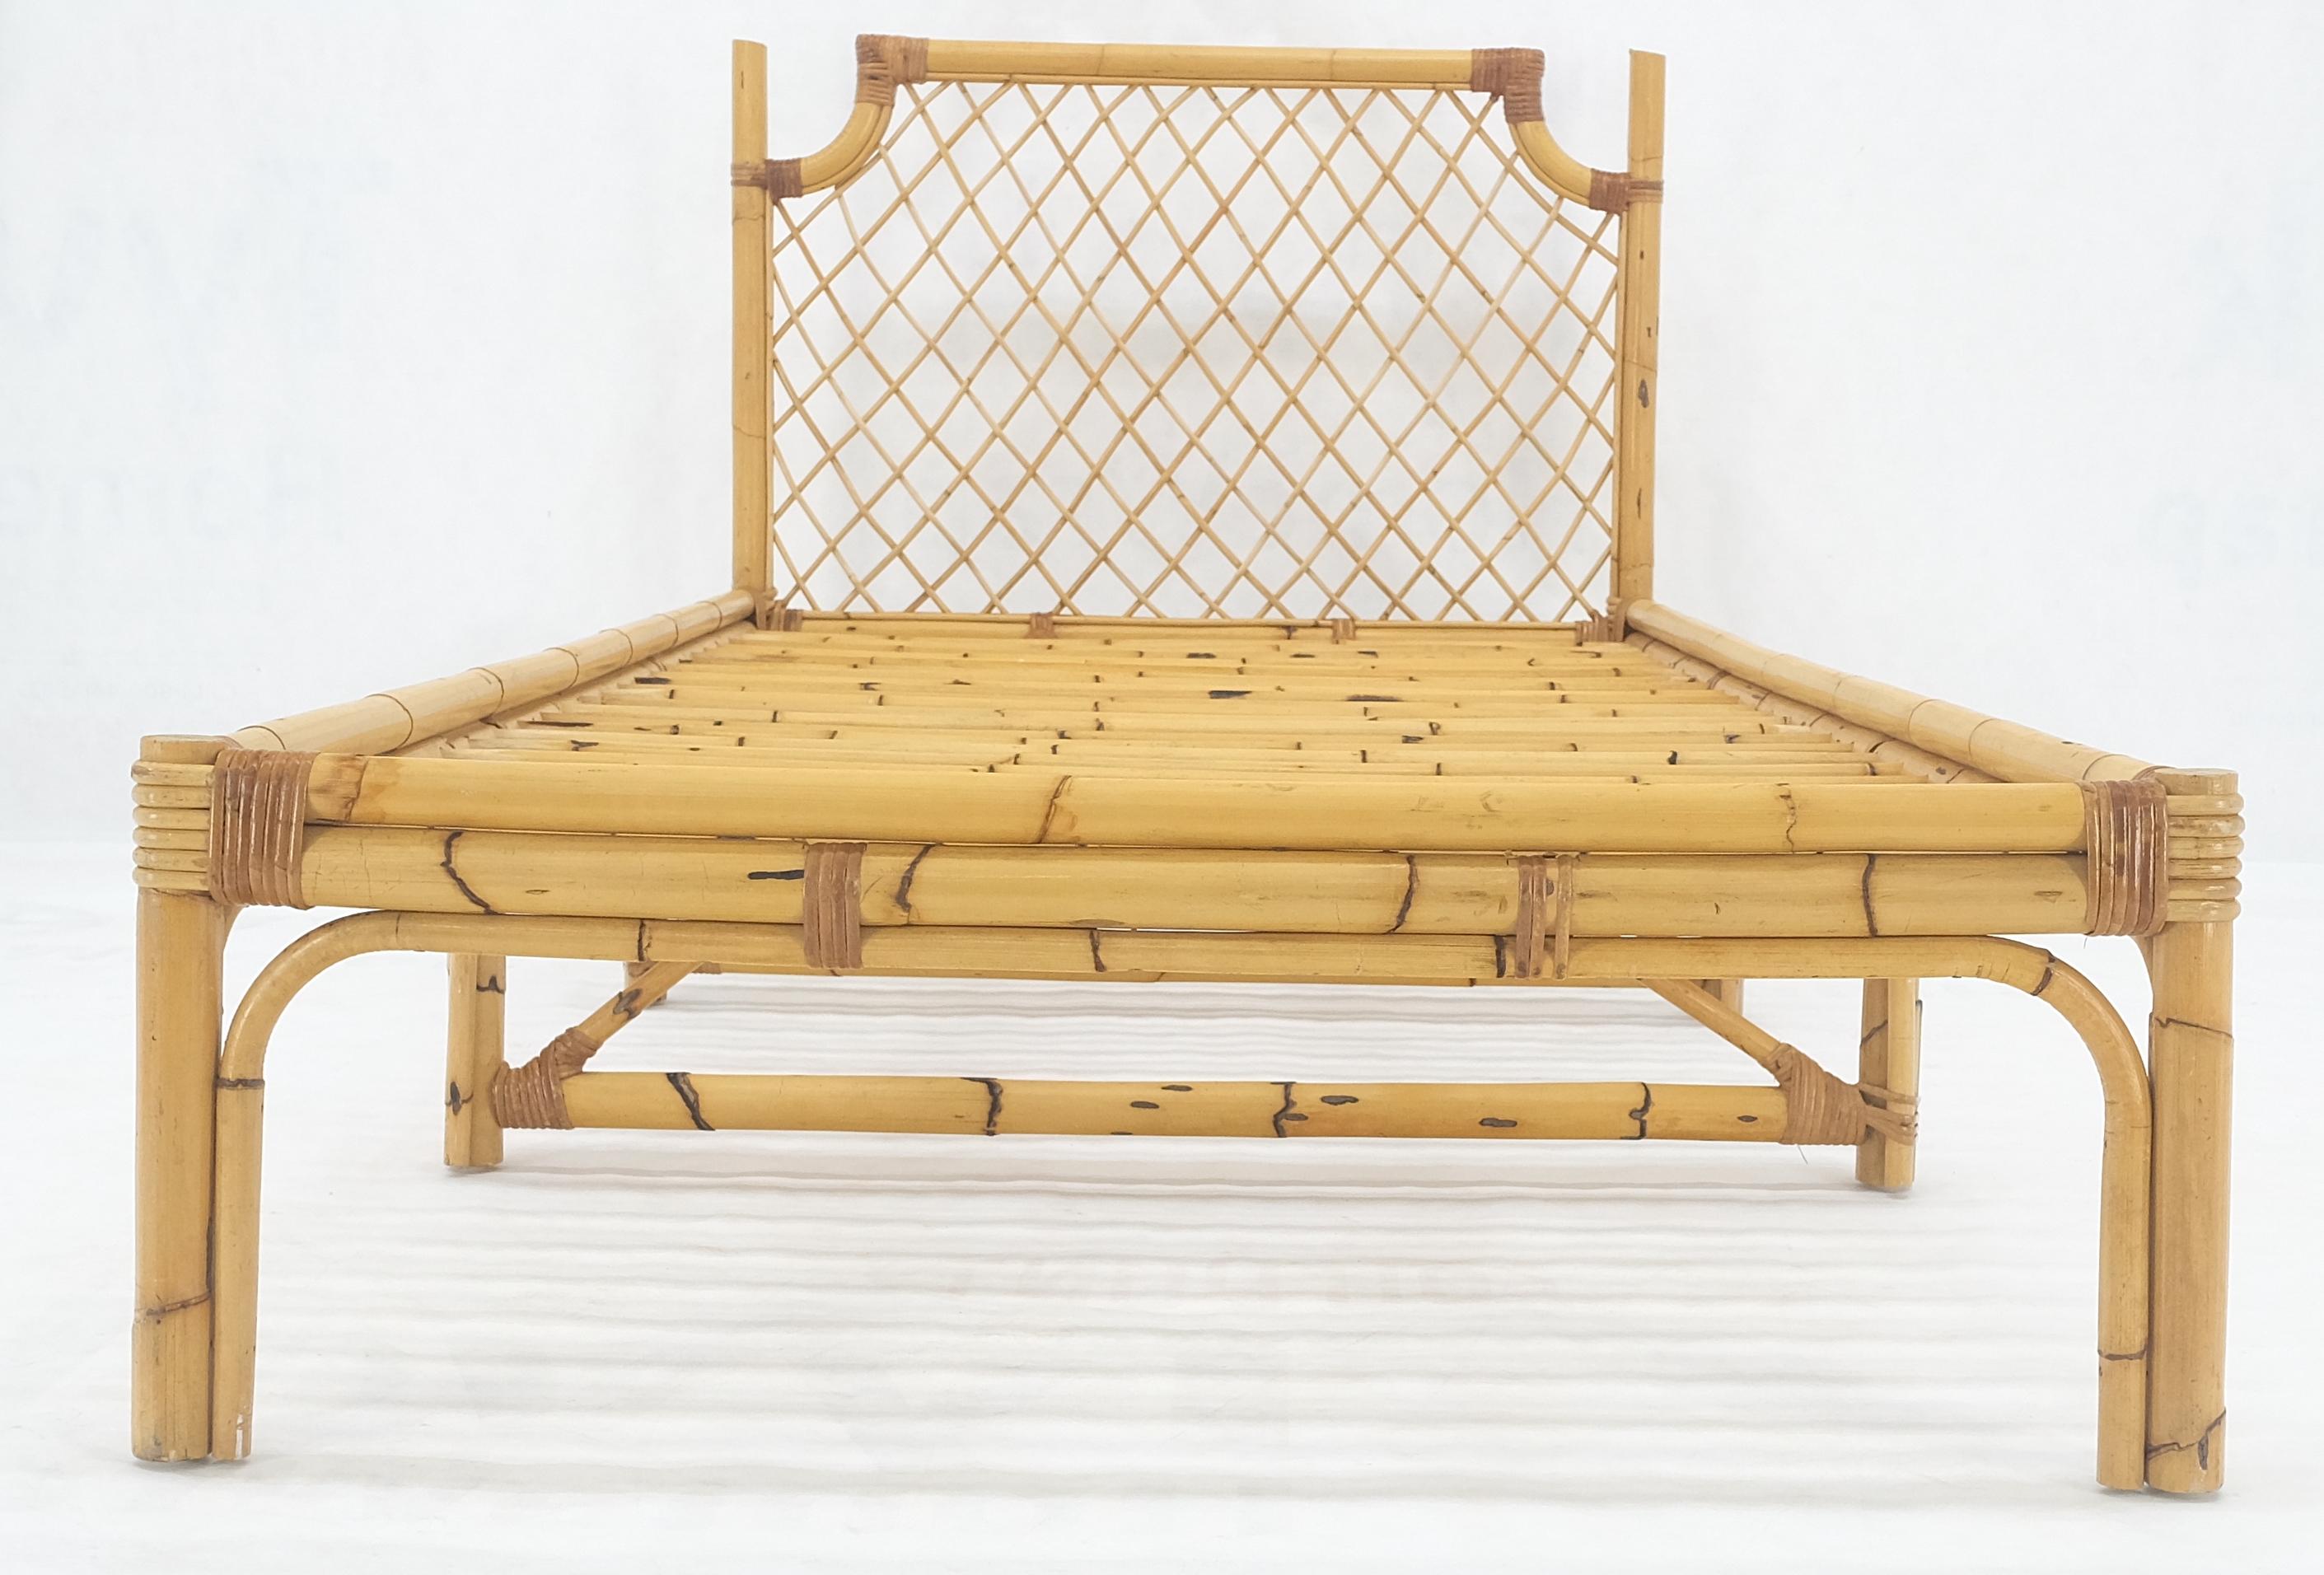 Lacquered Vintage 1970s Large Bamboo Chaise Lounge Daybed Frame MINT! For Sale